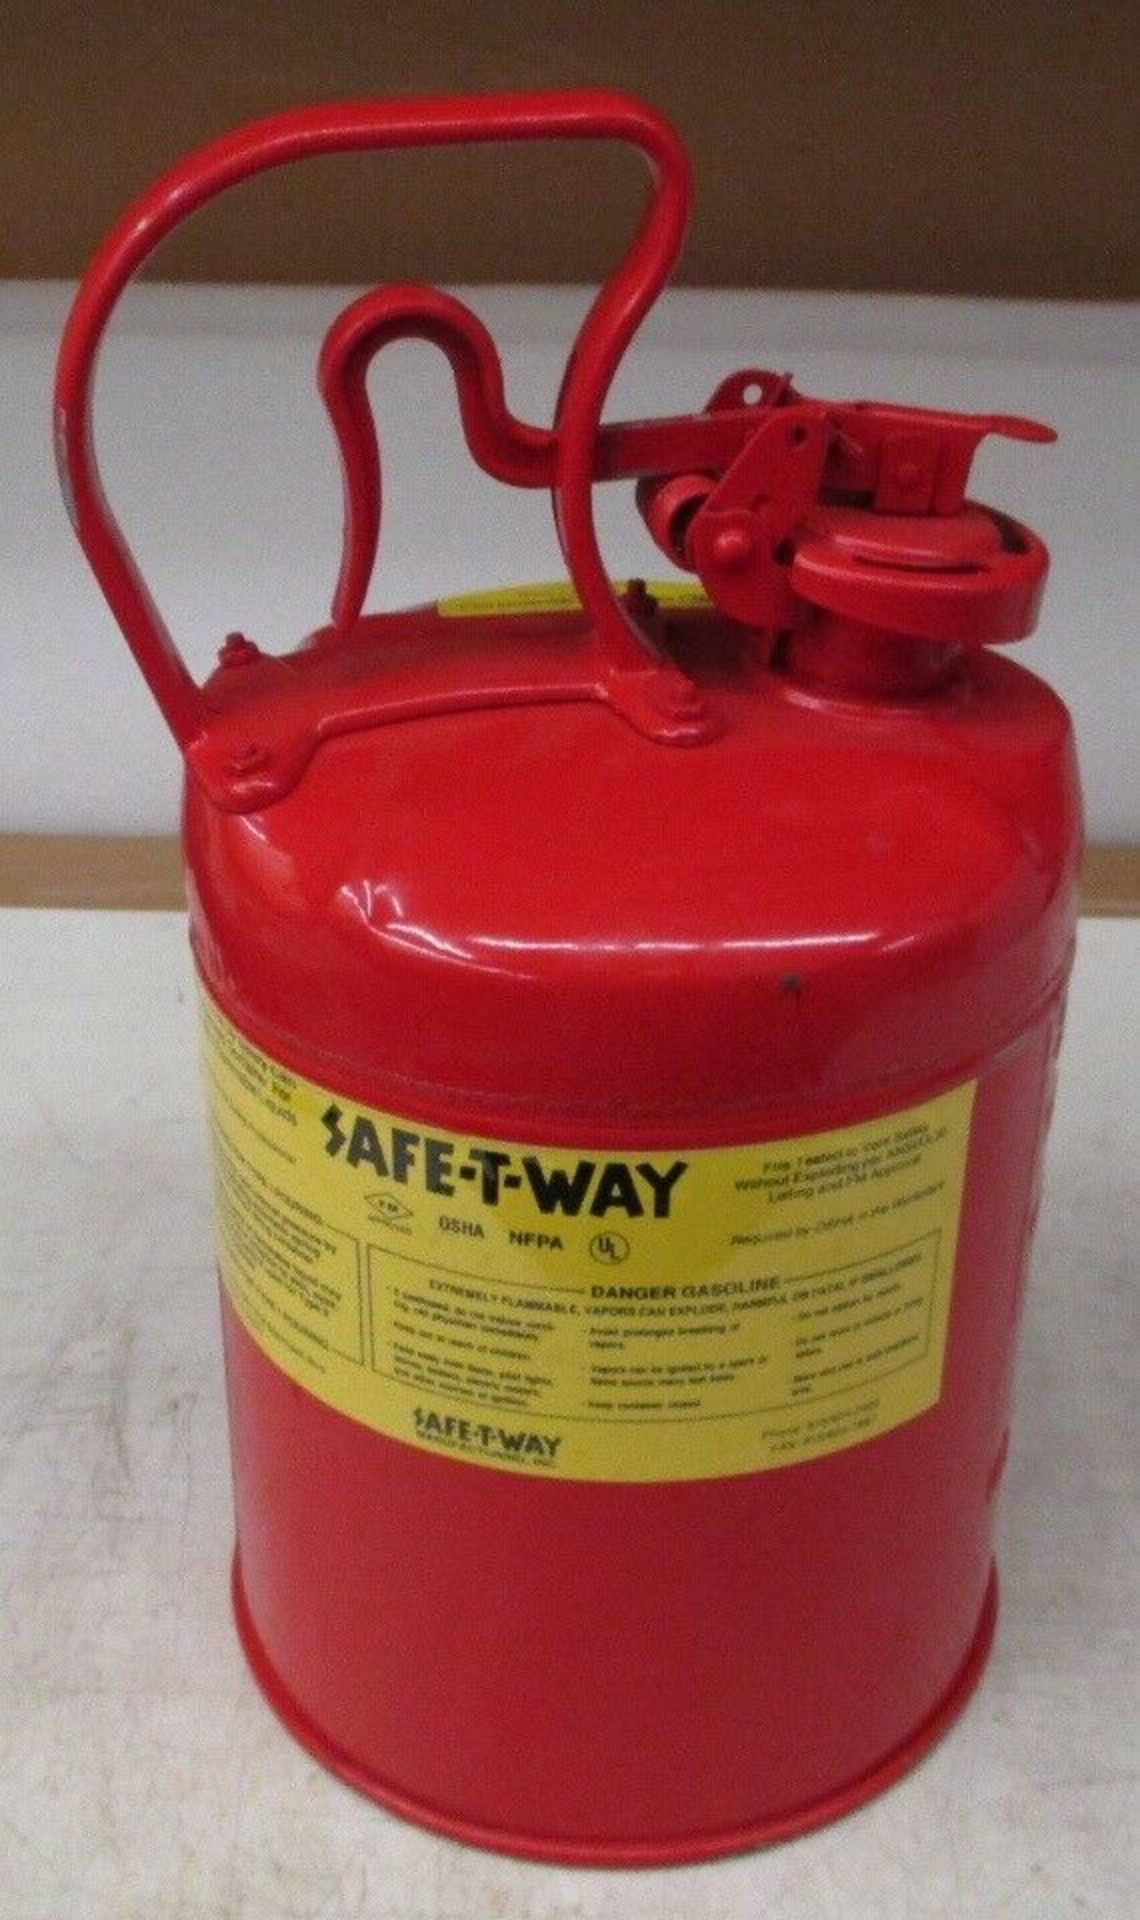 Safe-T-Way 2 Gallon Safety Can, New Old Stock